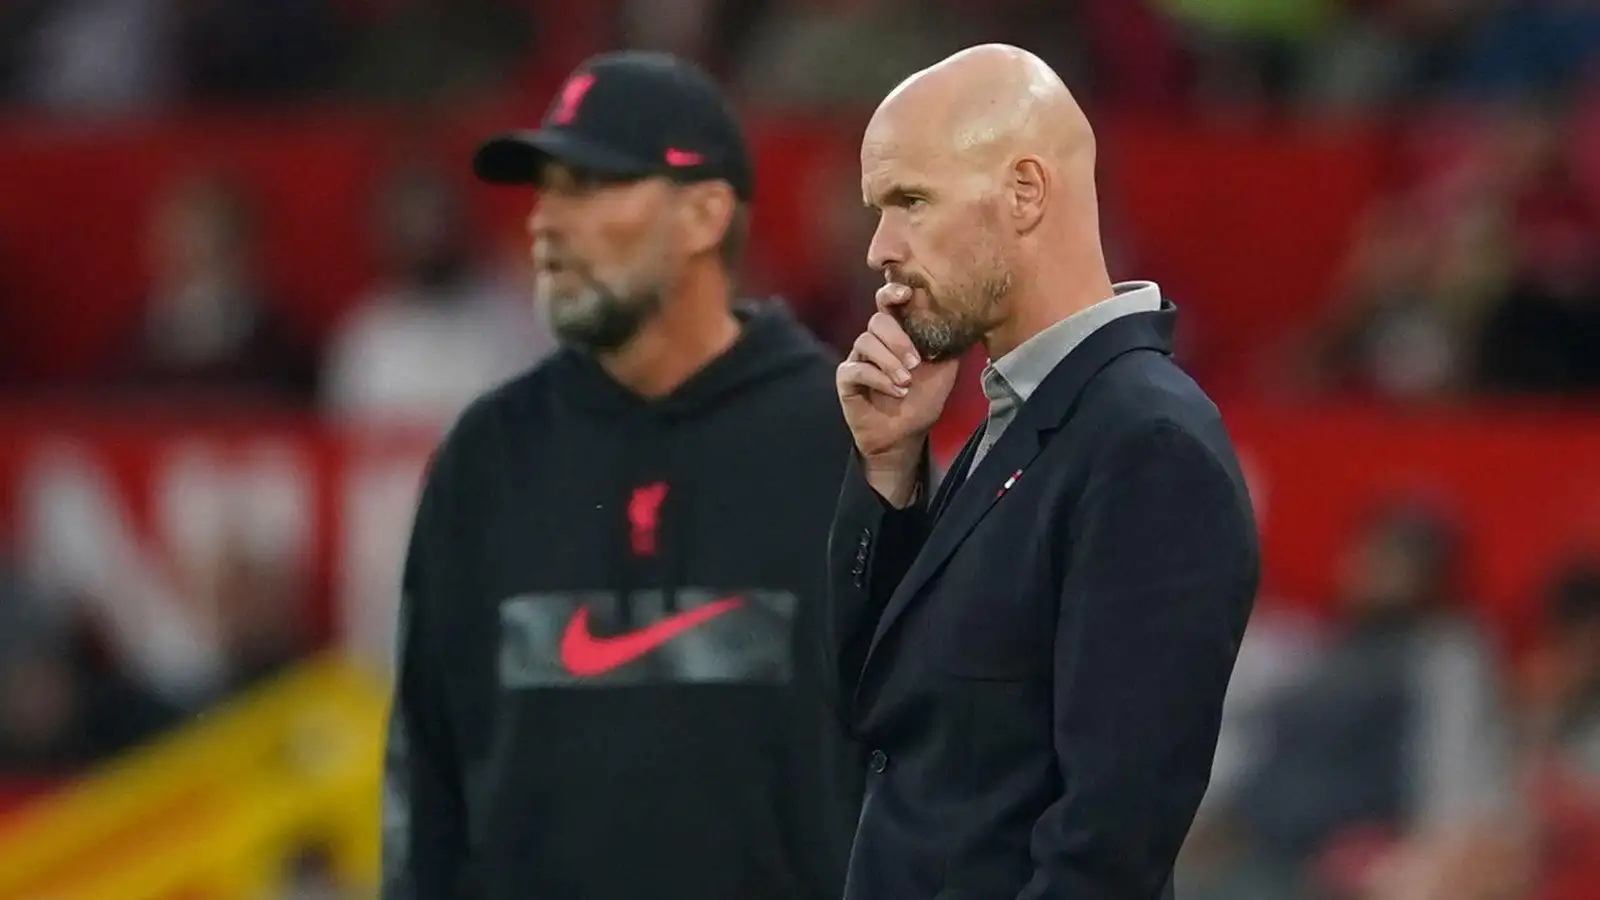 c?url=https%3A%2F%2Fd2x51gyc4ptf2q.cloudfront.net%2Fcontent%2Fuploads%2F2023%2F03%2F23120421%2FMan Utd manager Erik ten Hag thinks on the touchline with Jurgen Klopp in the background